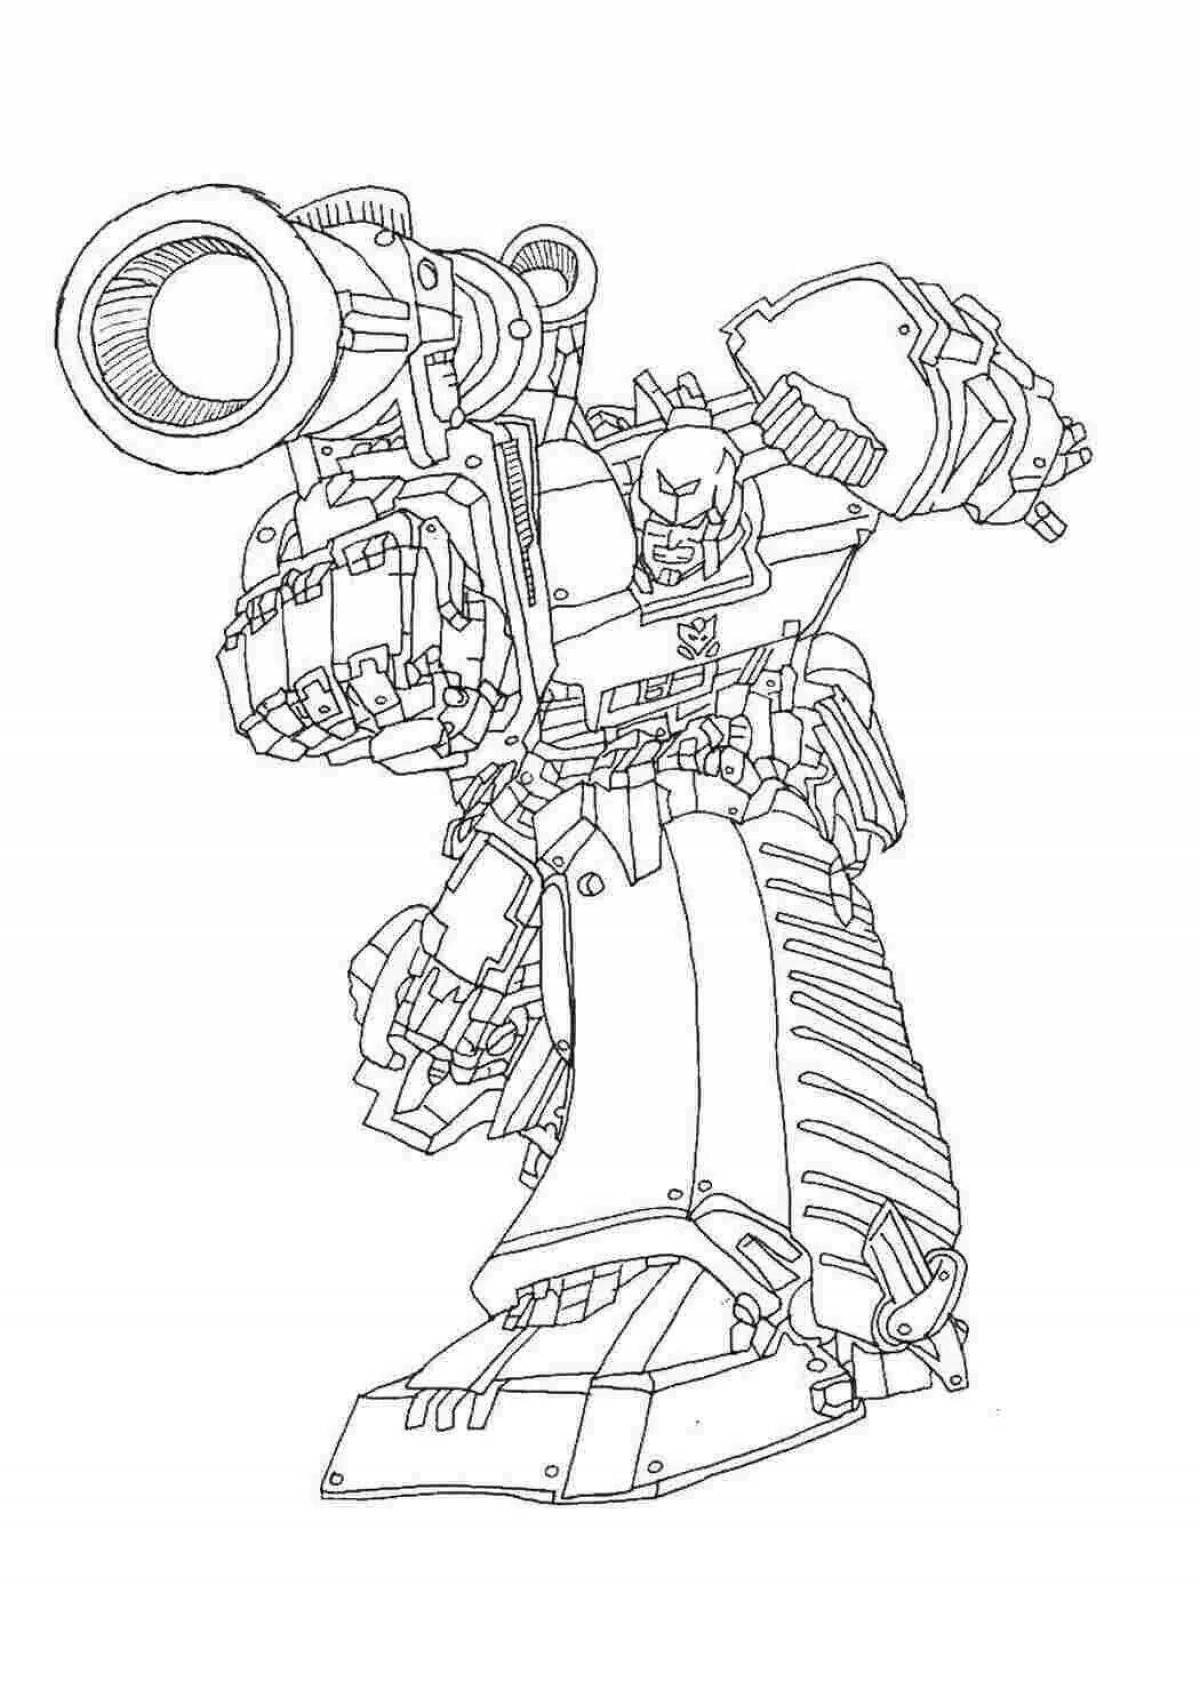 Playful ironhide coloring page